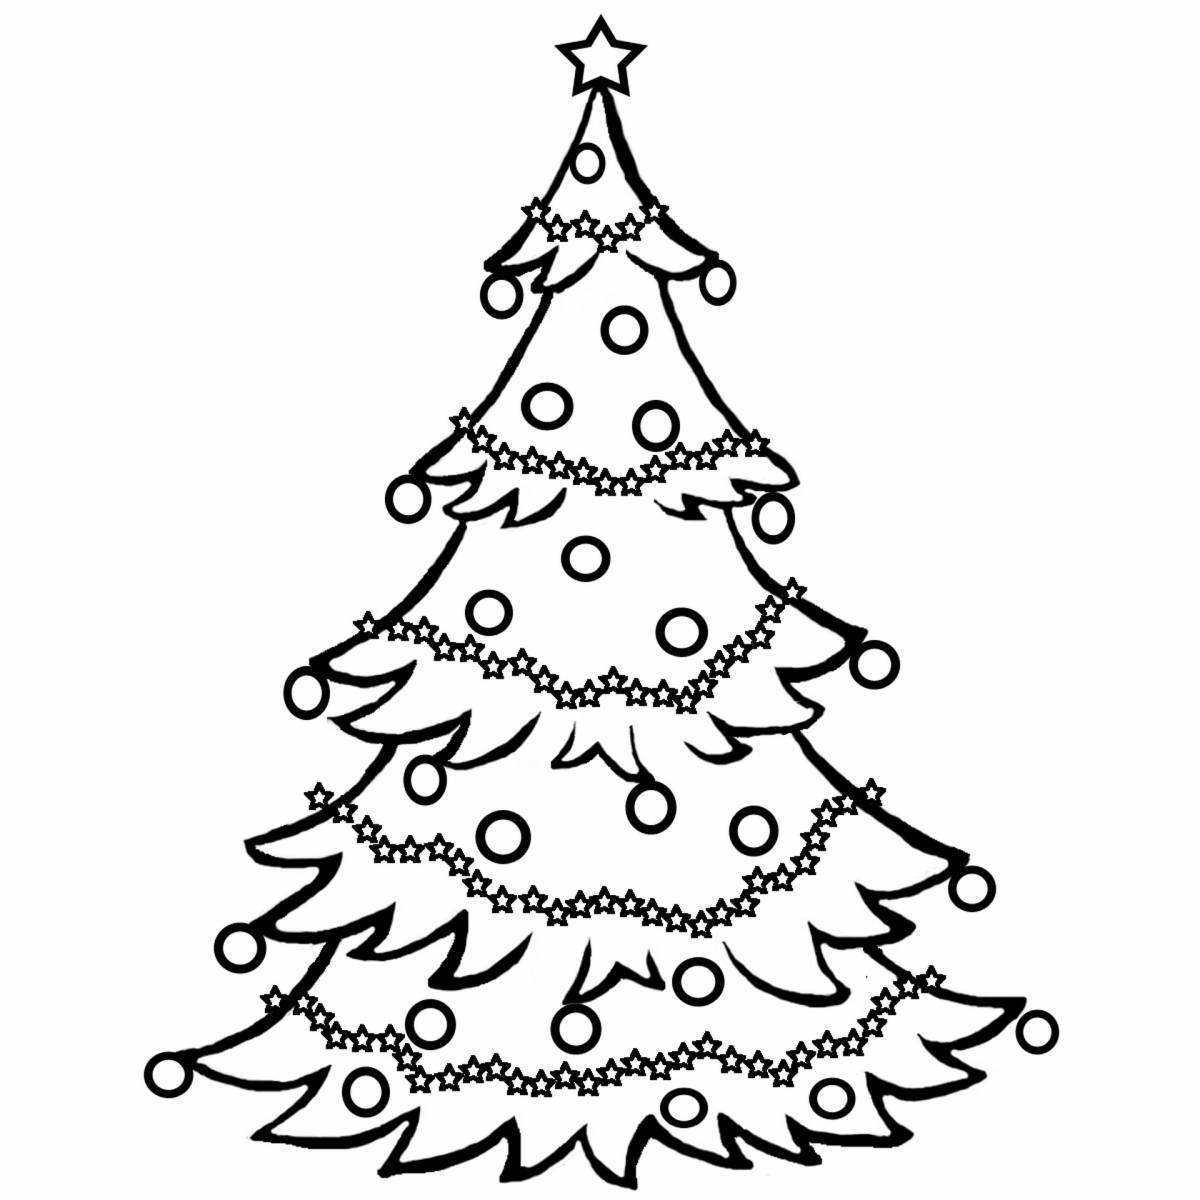 Merry Christmas tree coloring book for 5-6 year olds